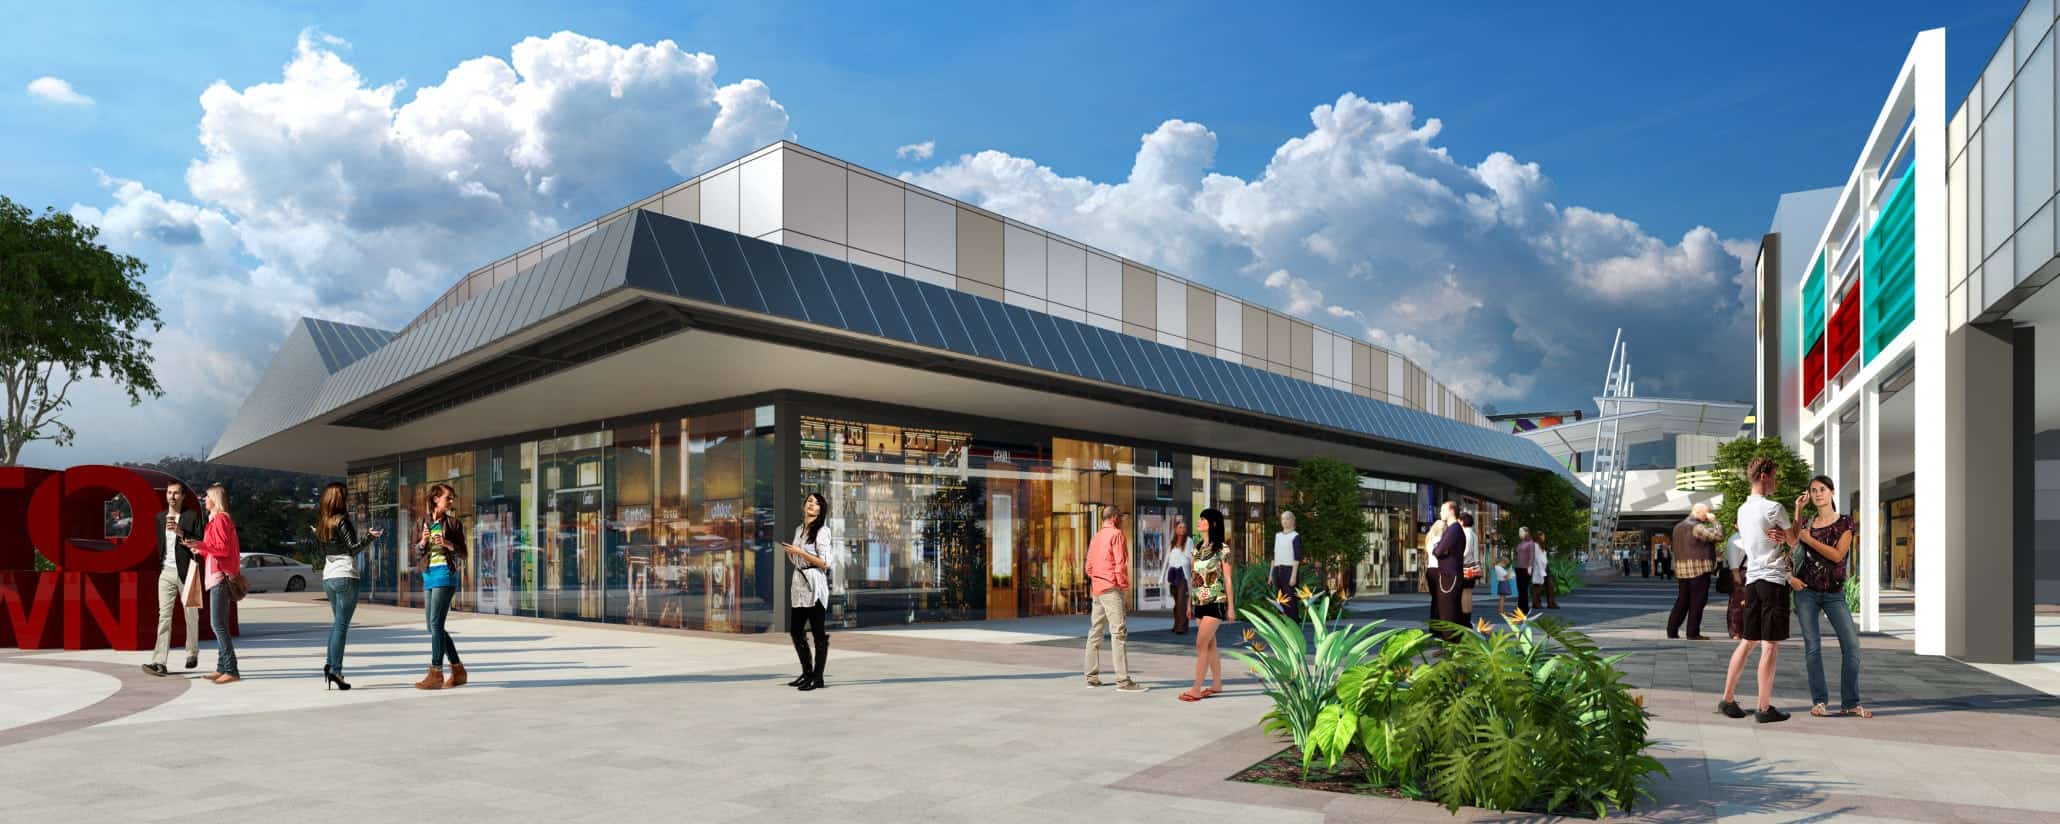 https://www.shoppingcentrenews.com.au/shopping-centre-news/harbour-town-gold-coast-ups-the-outlet-shopping-stakes-with-25-new-stores-set-to-arrive-next-week/